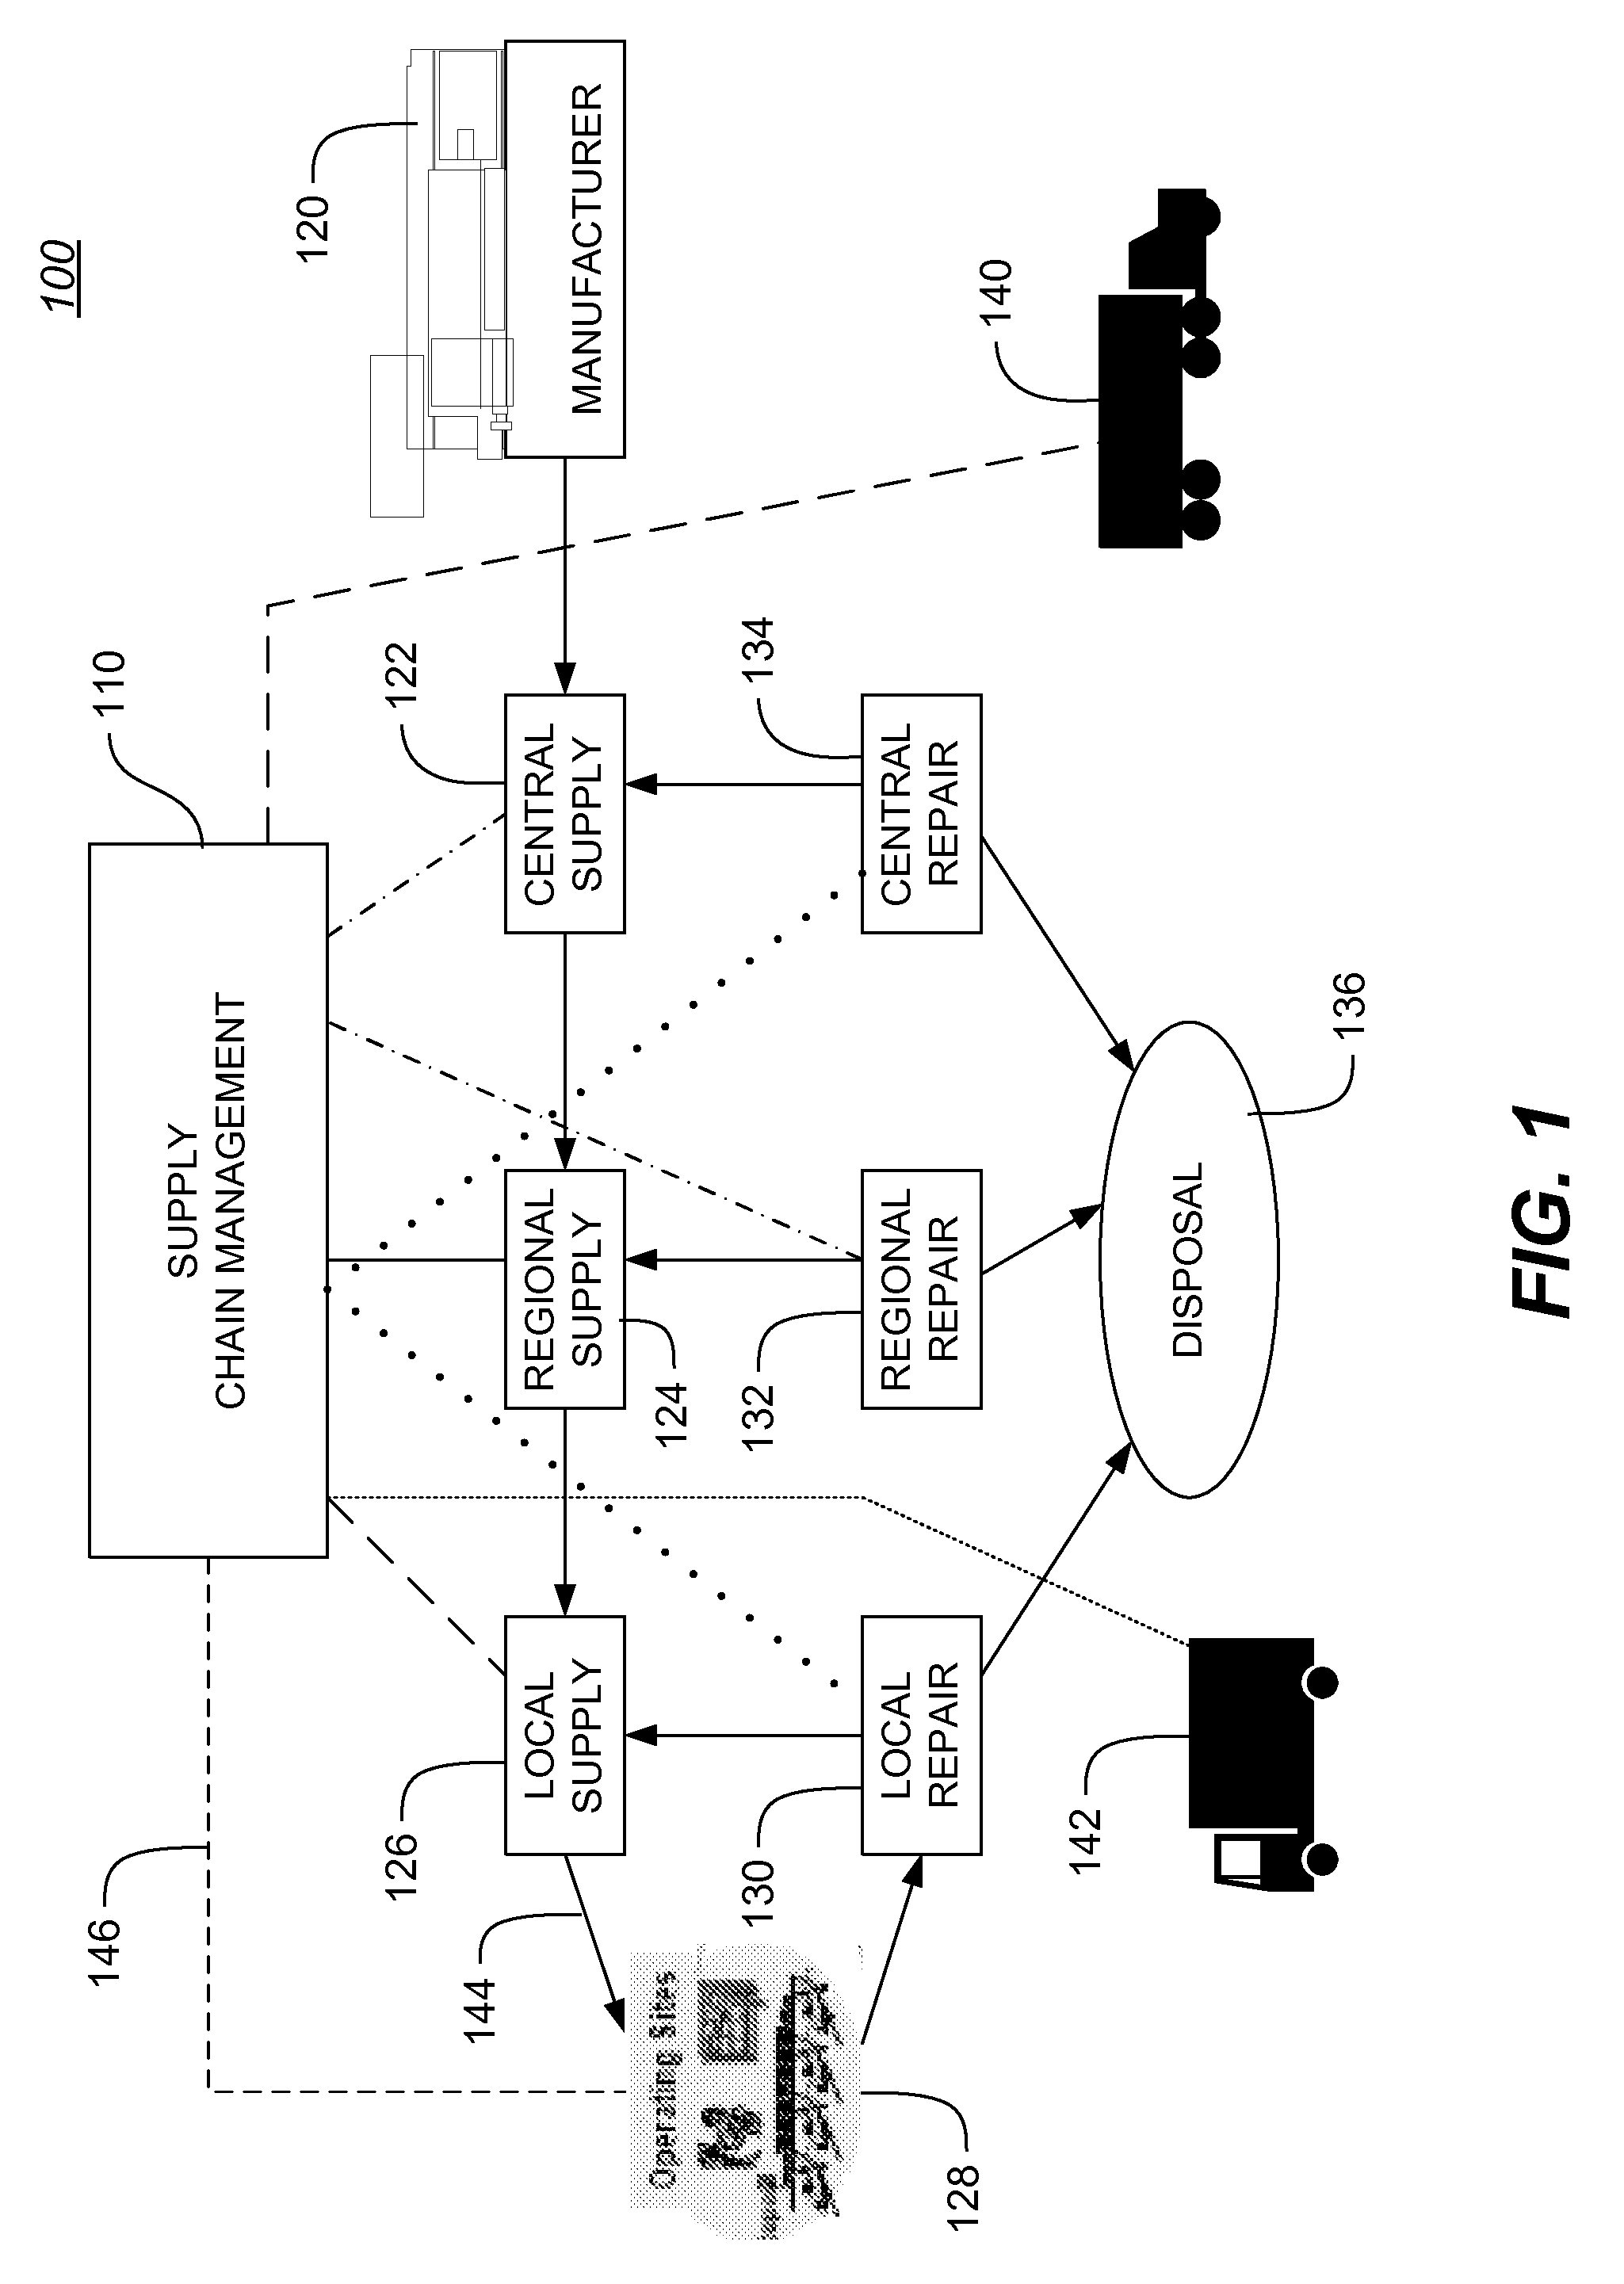 Systems, methods and apparatus for implementing hybrid meta-heuristic inventory optimization based on production schedule and asset routing